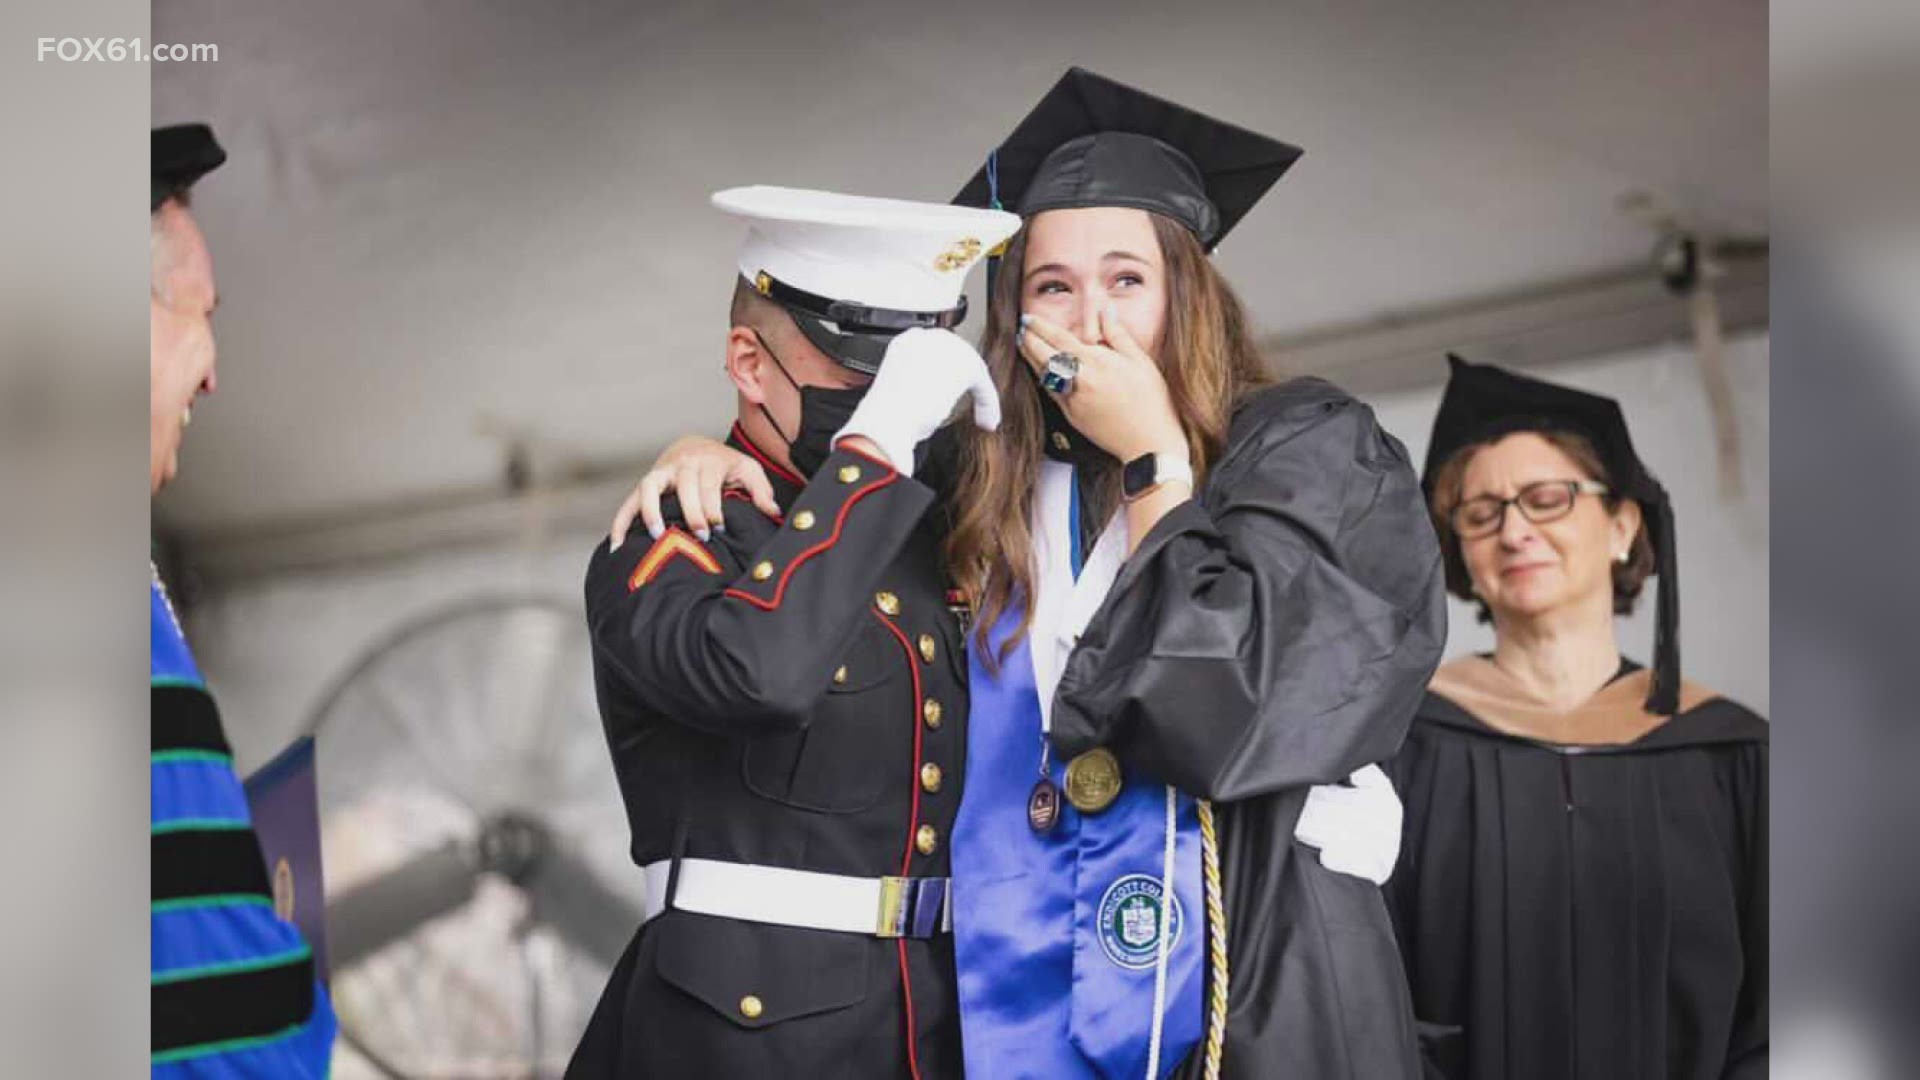 Her brother, a Marine, surprised her at the ceremony